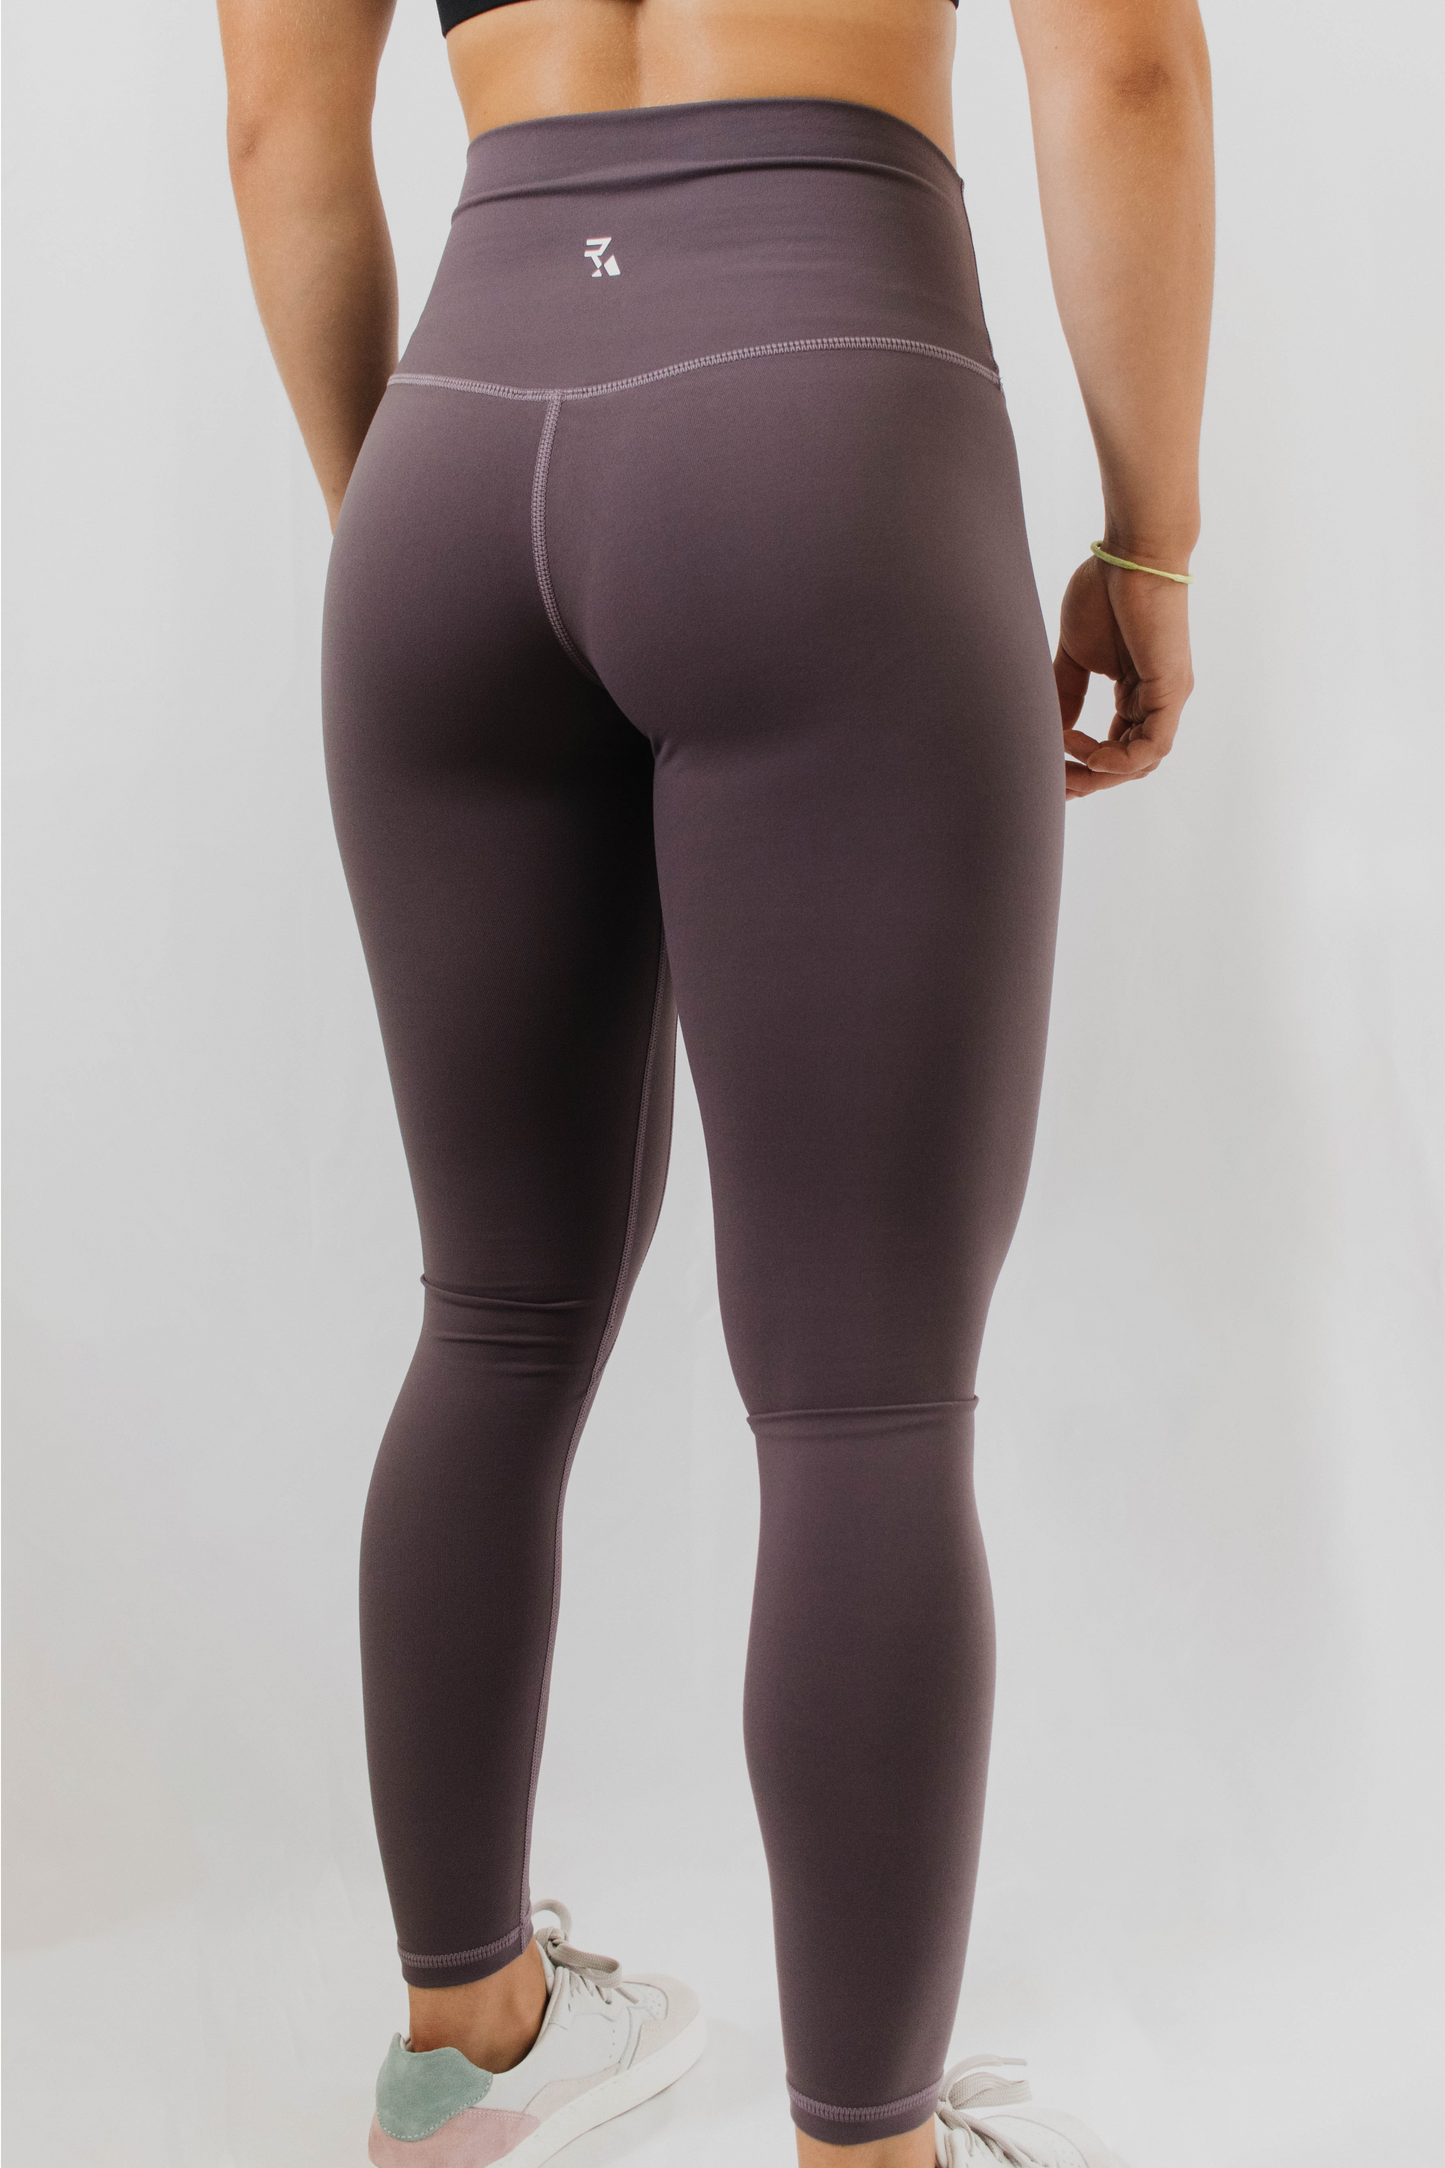 LEGGING - Collection Eve